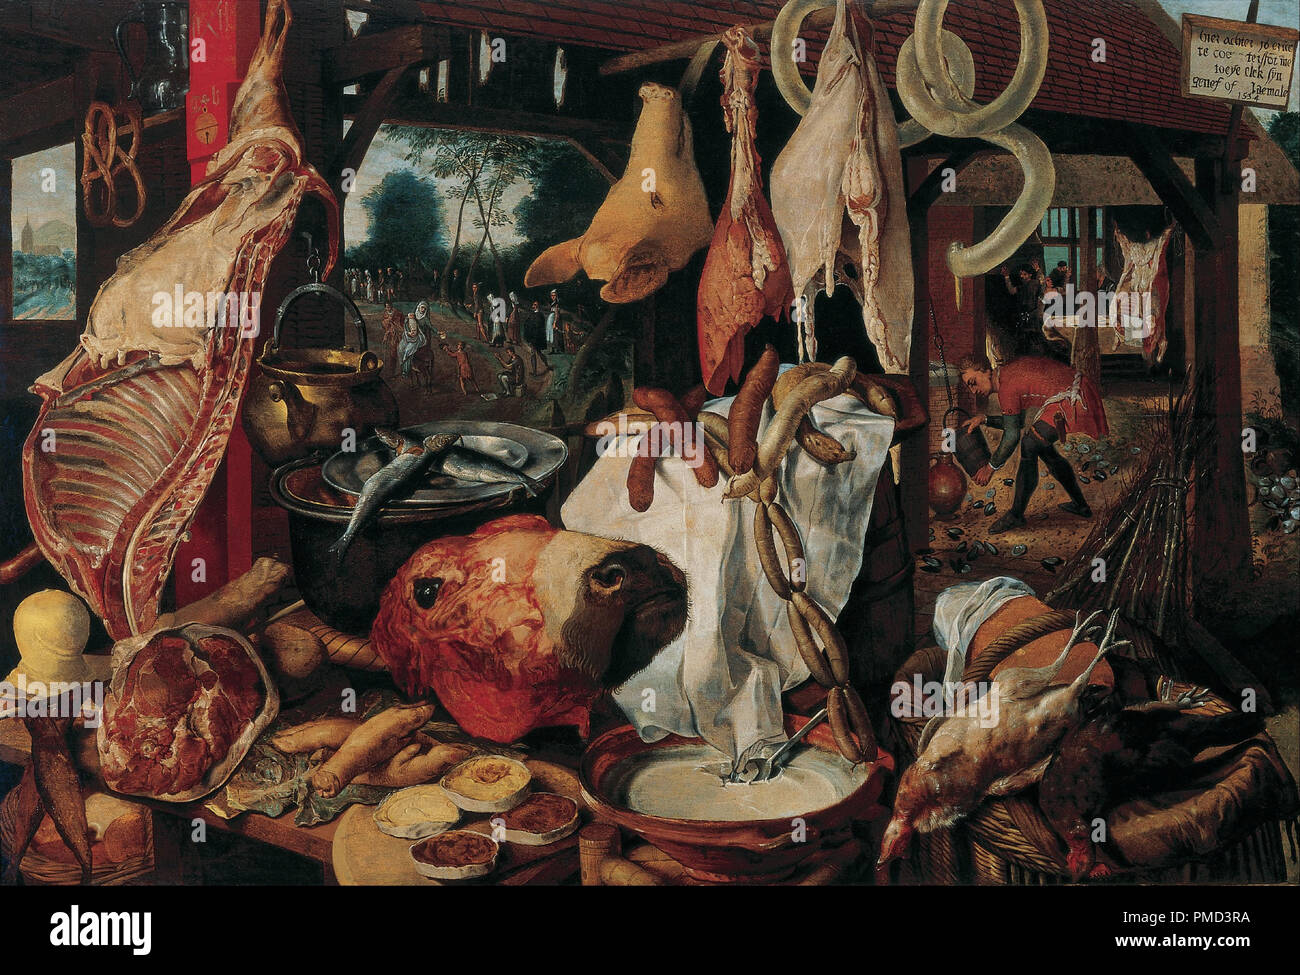 Still Life with Meat and the Holy Family (Butcher's Stall with the Flight into Egypt / Meat Stall with the Holy Family Giving Alms). Date/Period: 1551. Painting. Oil on panel. Height: 111 cm (43.7 in); Width: 165 cm (64.9 in). Author: PIETER AERTSEN. AERTSEN, PIETER. Stock Photo